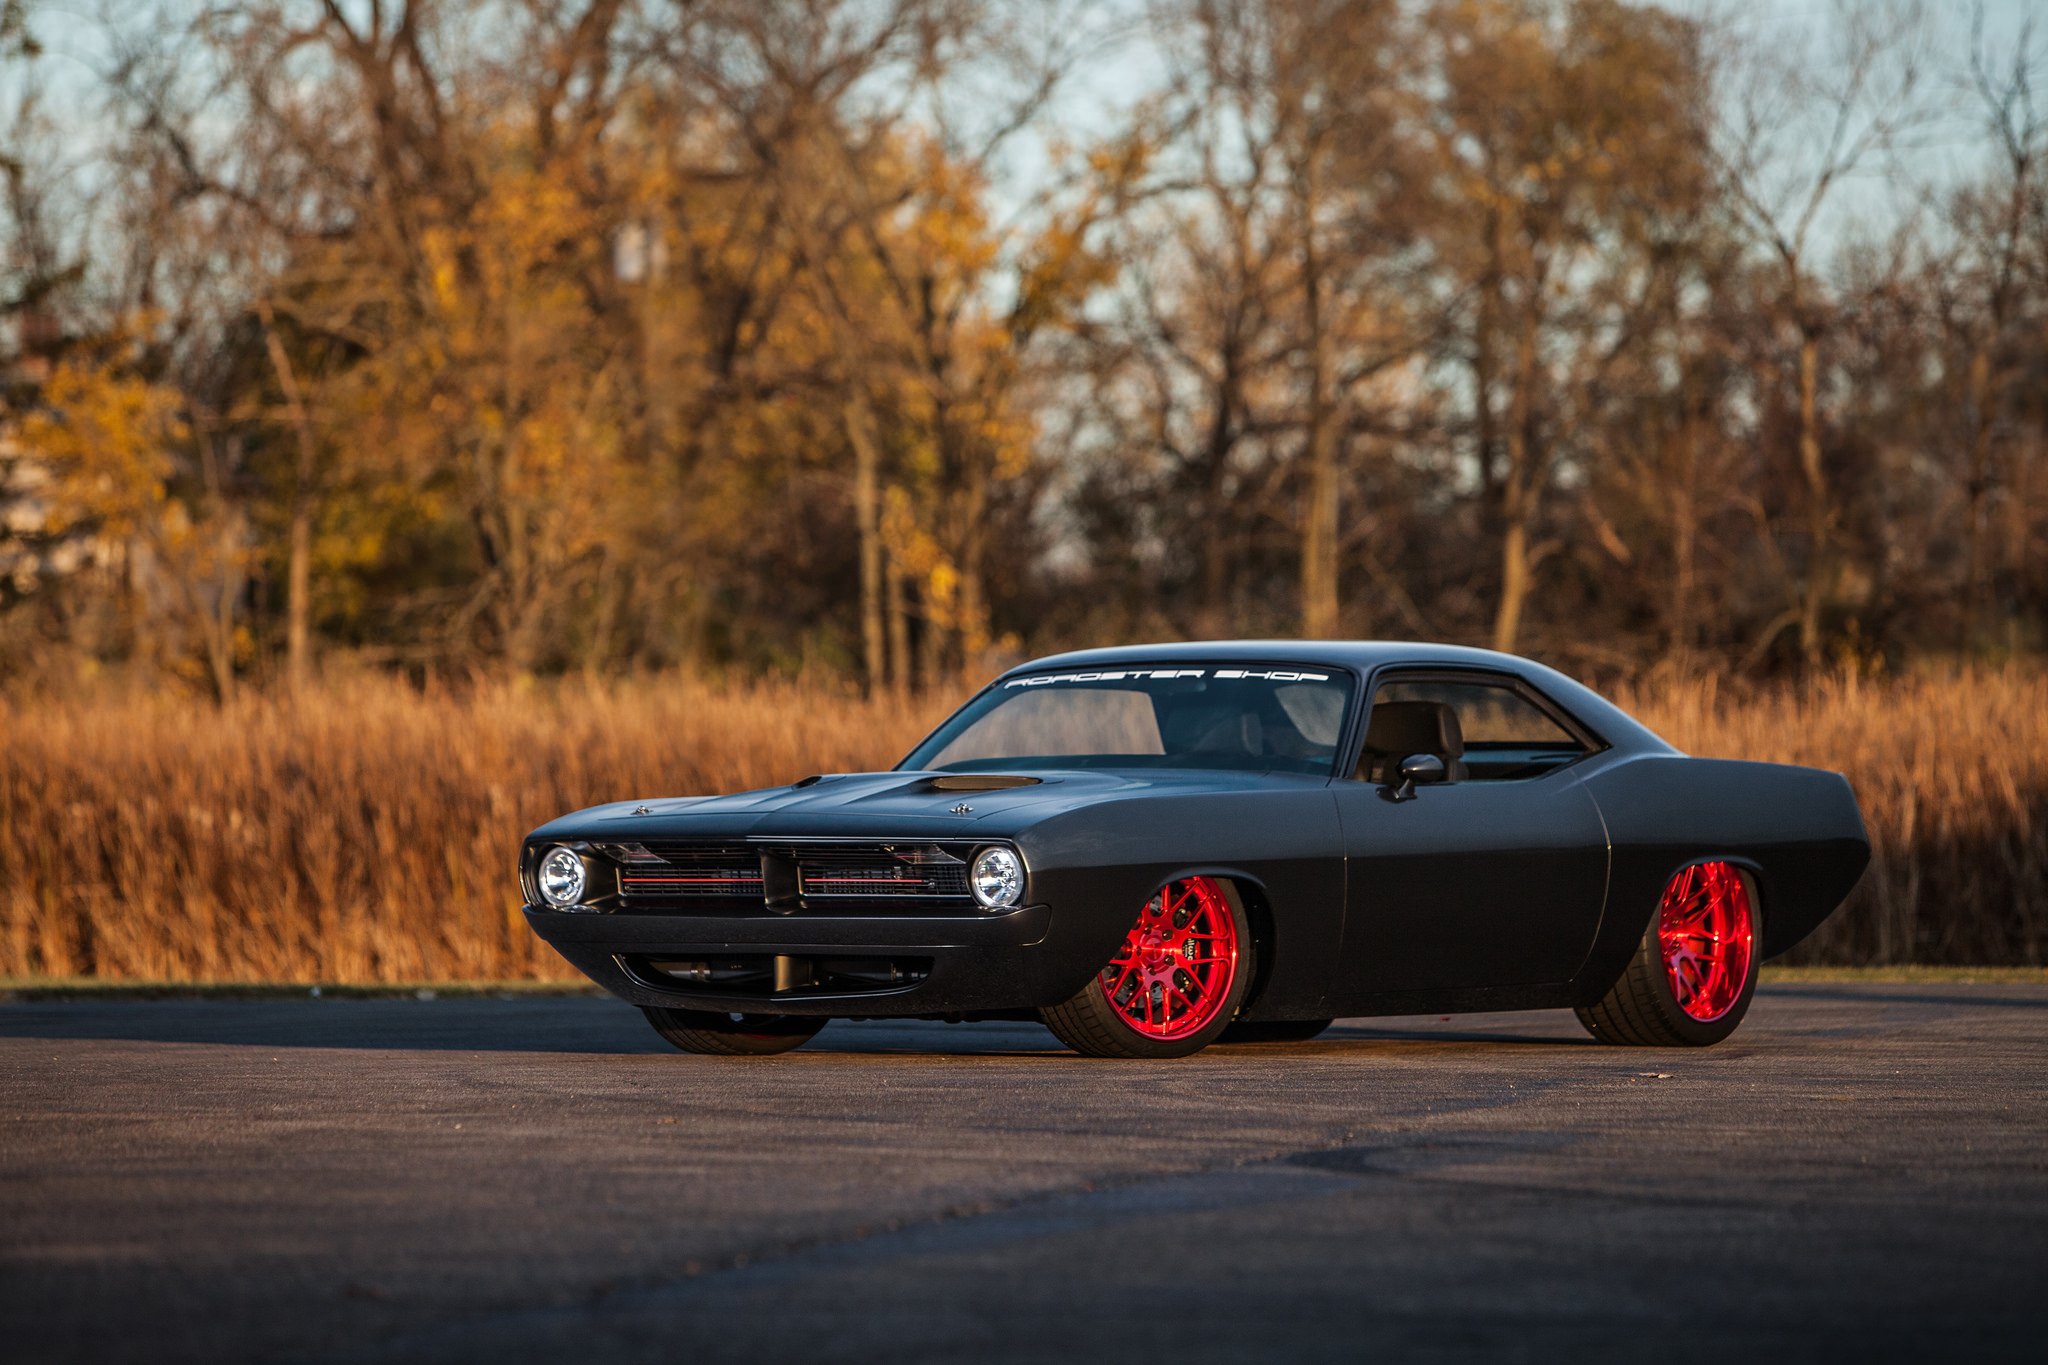 Custom Vented Hood on Black Plymouth Barracuda - Photo by Forgeline Motorsports